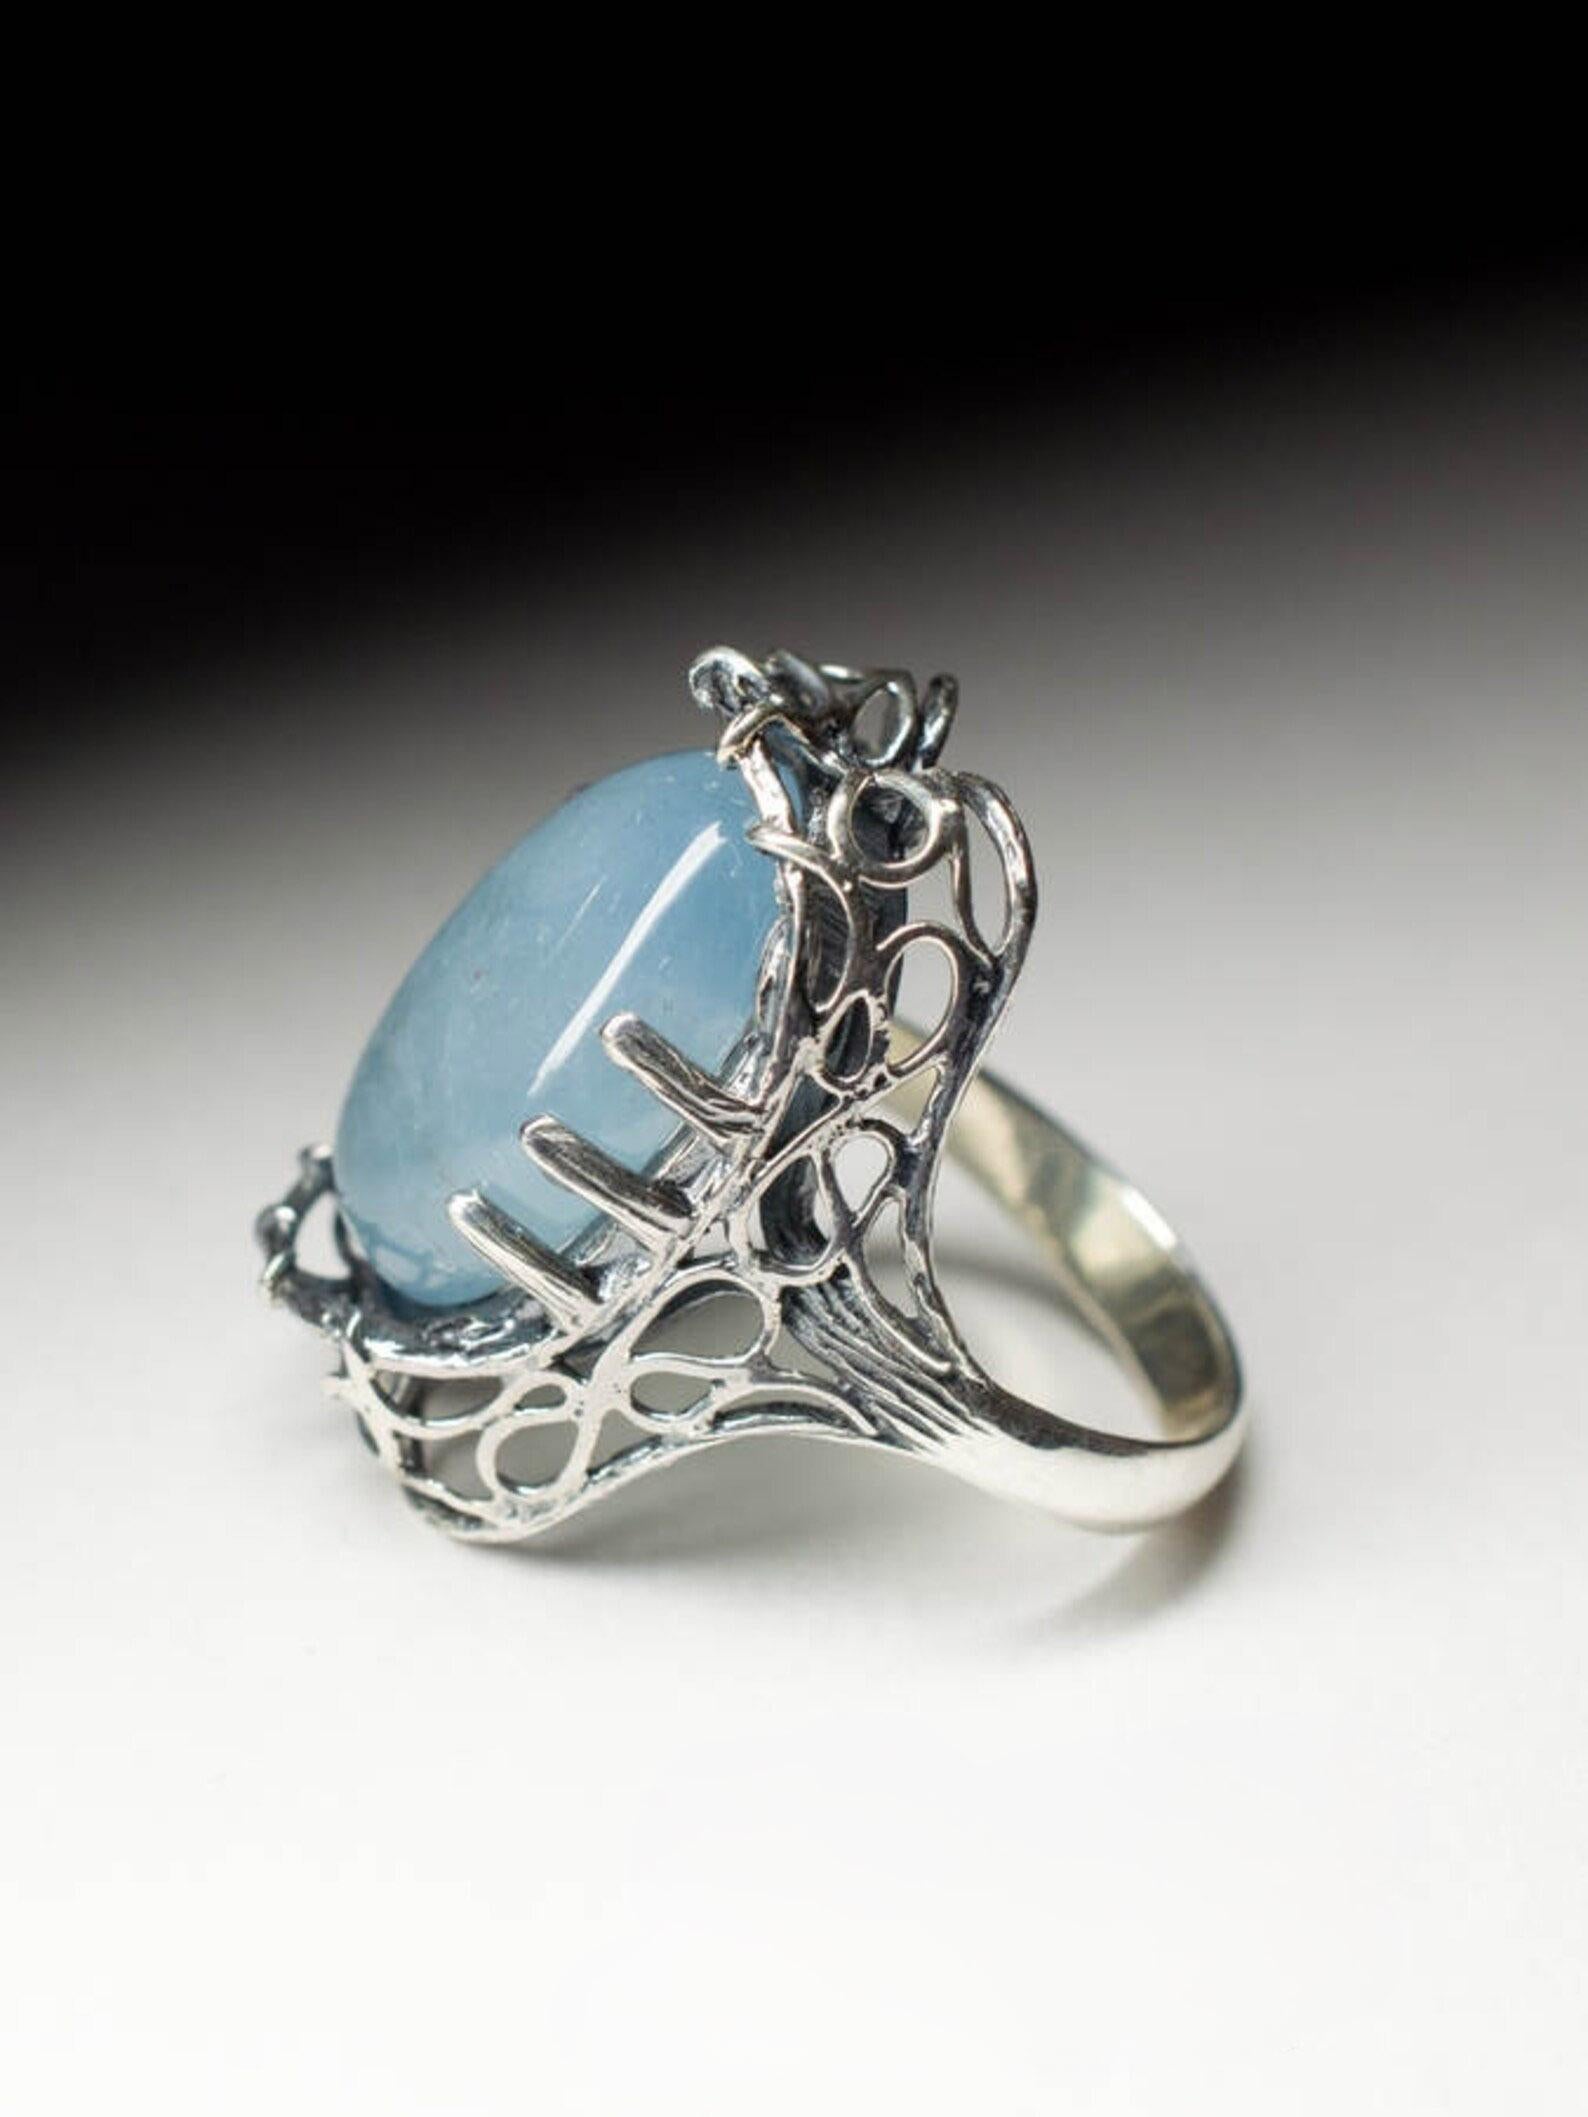 Women's or Men's Aquamarine Ring Gothic style Light Blue Icy Beryl Cabochon Gemstone vintage ring For Sale